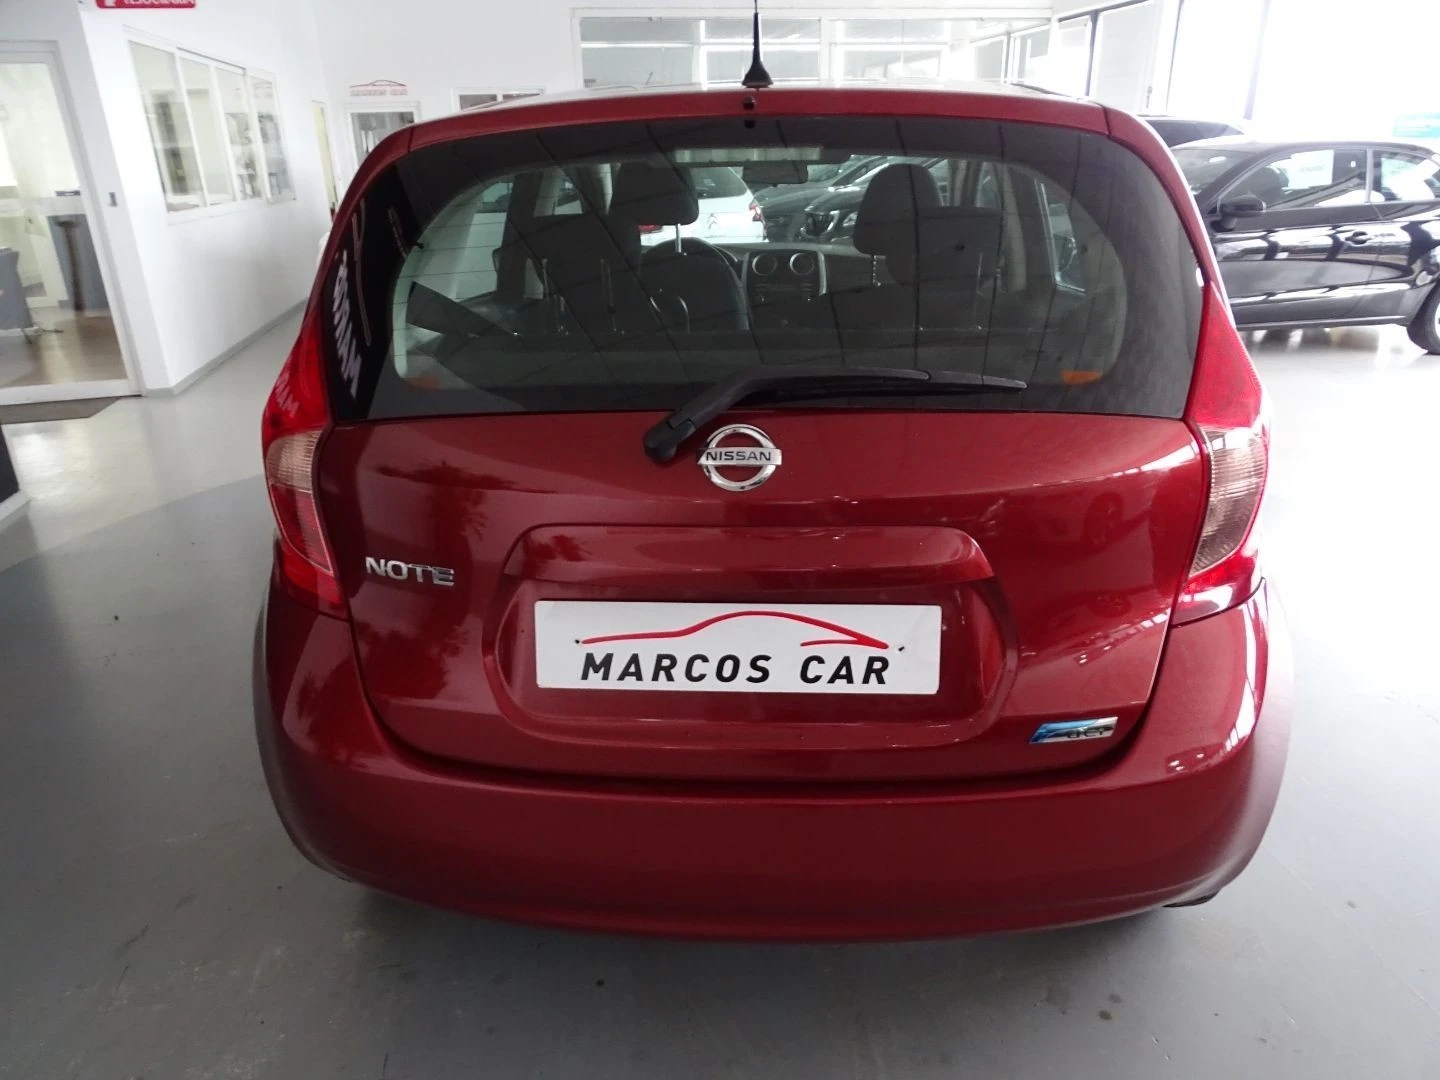 Nissan Note 1.5 dCi Acenta